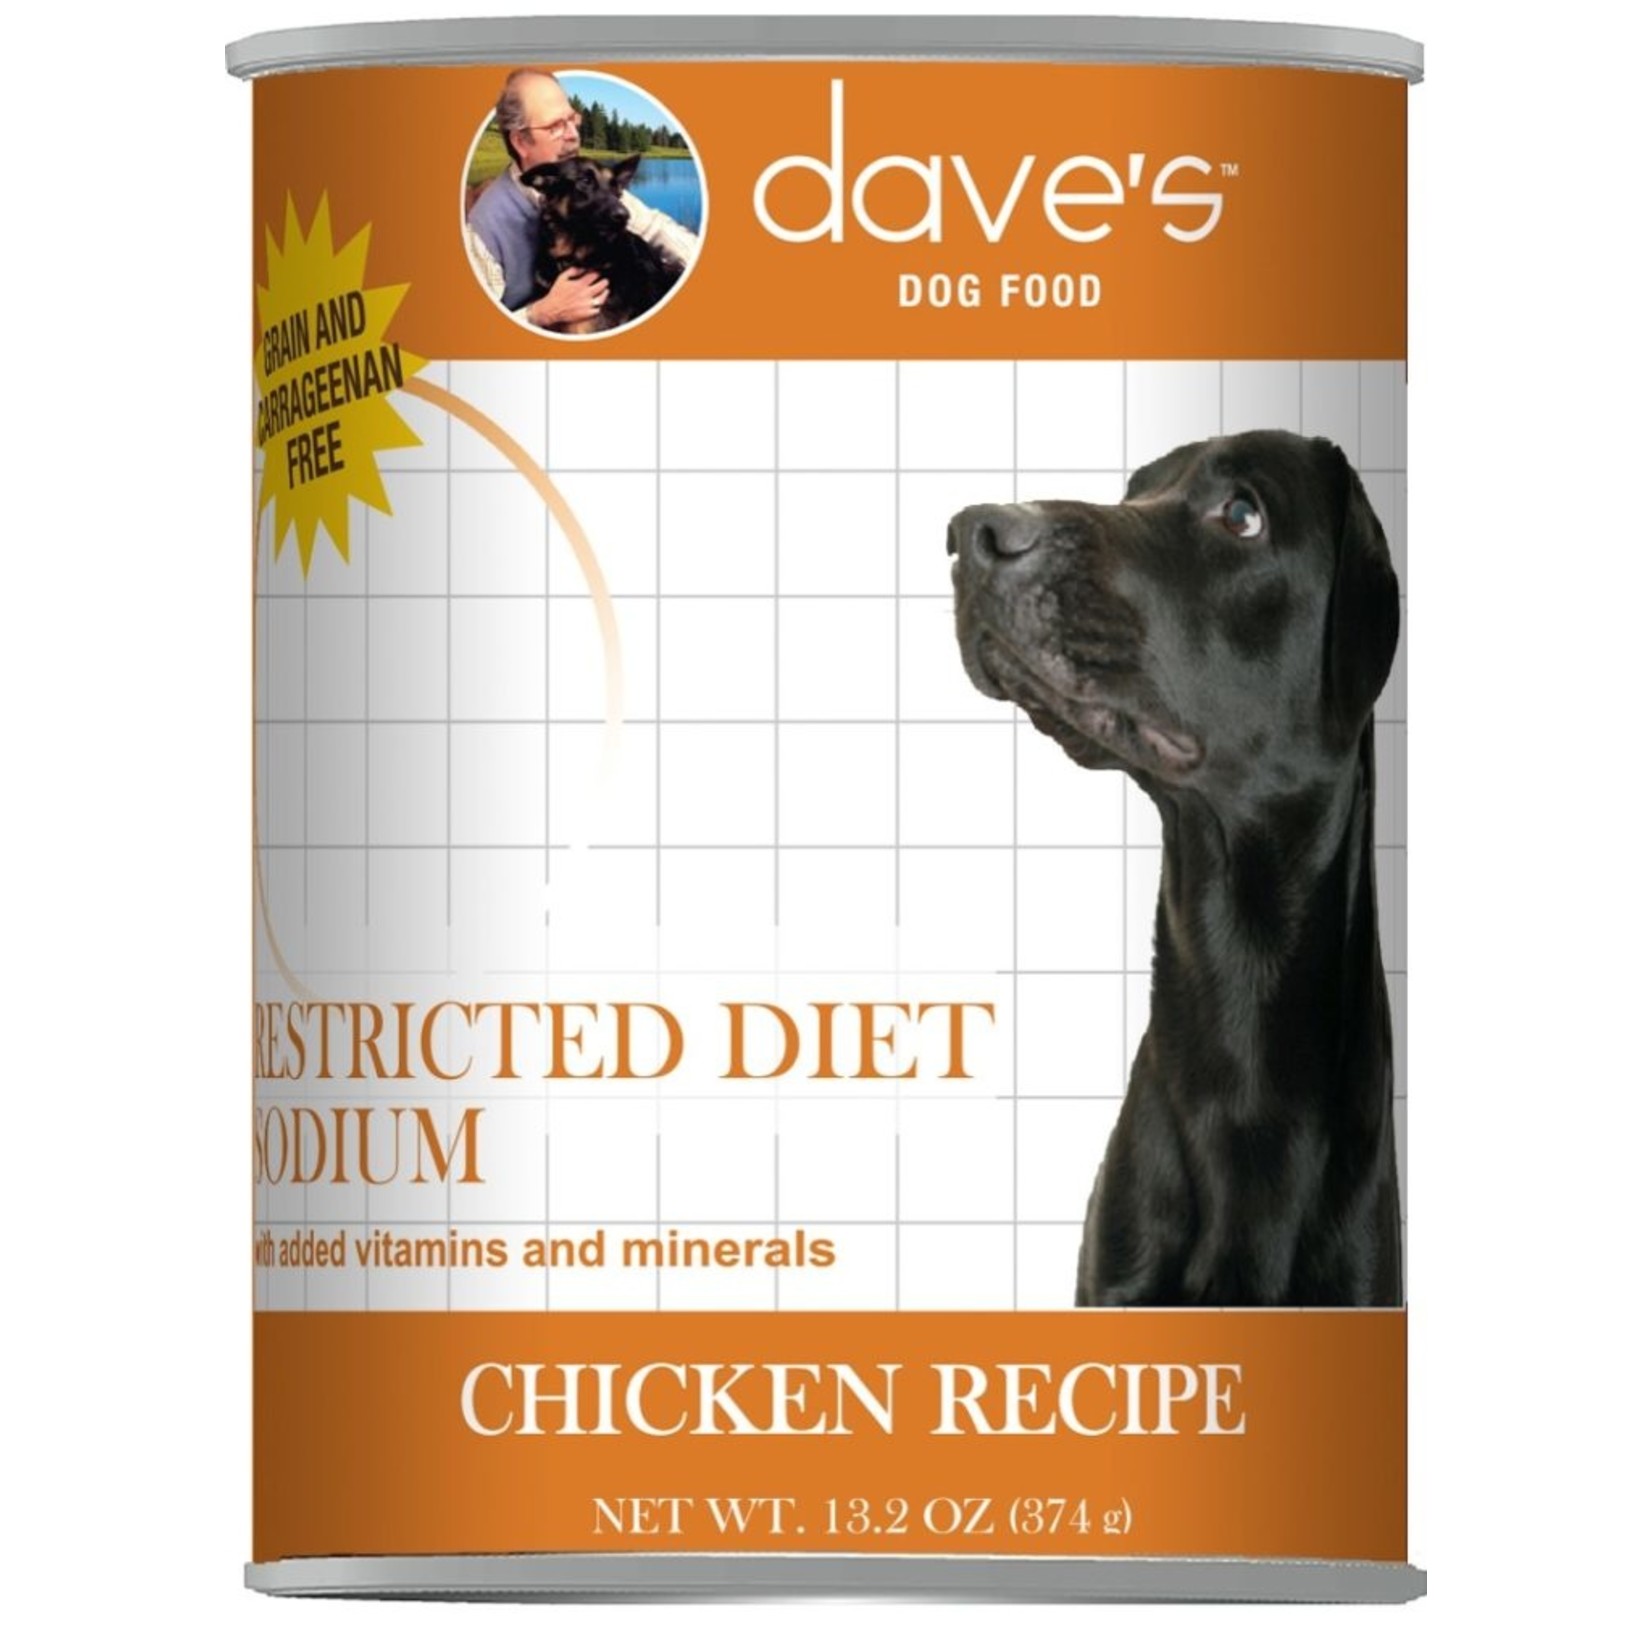 Daves Pet Food Dave's Wet Dog Food Restricted Diet Sodium Chicken Recipe 13oz Can Grain Free